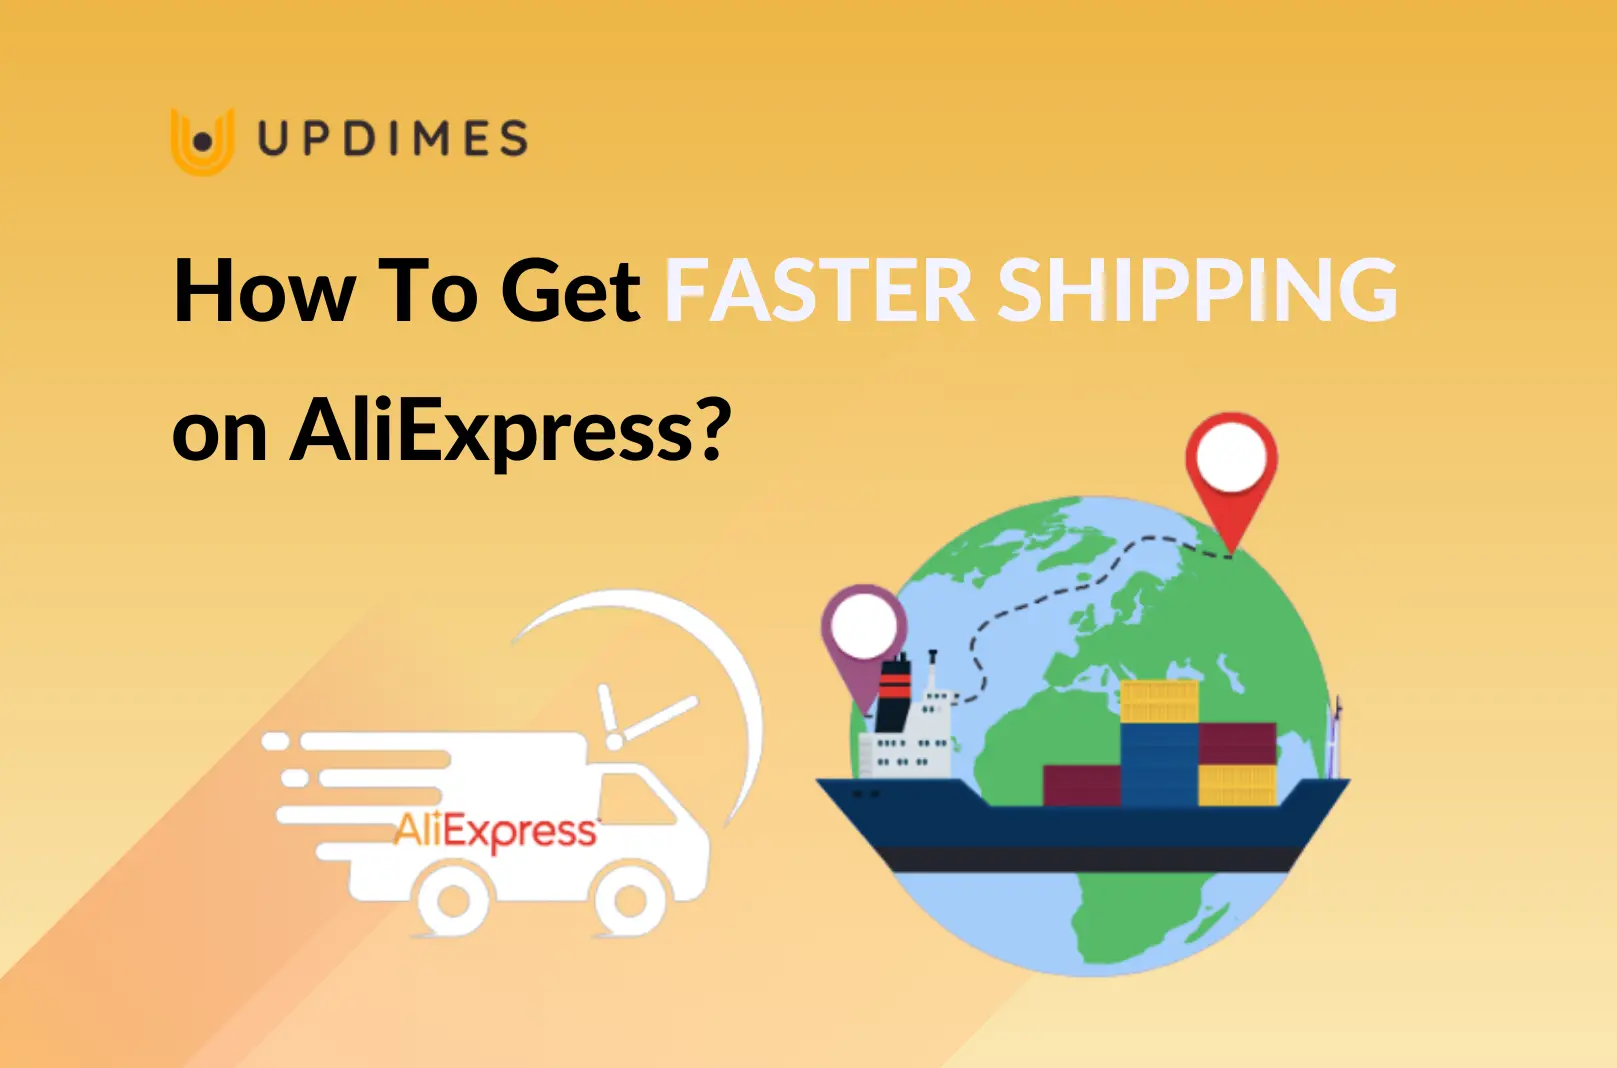 How to Get Faster Shipping on AliExpress? | UPDIMES